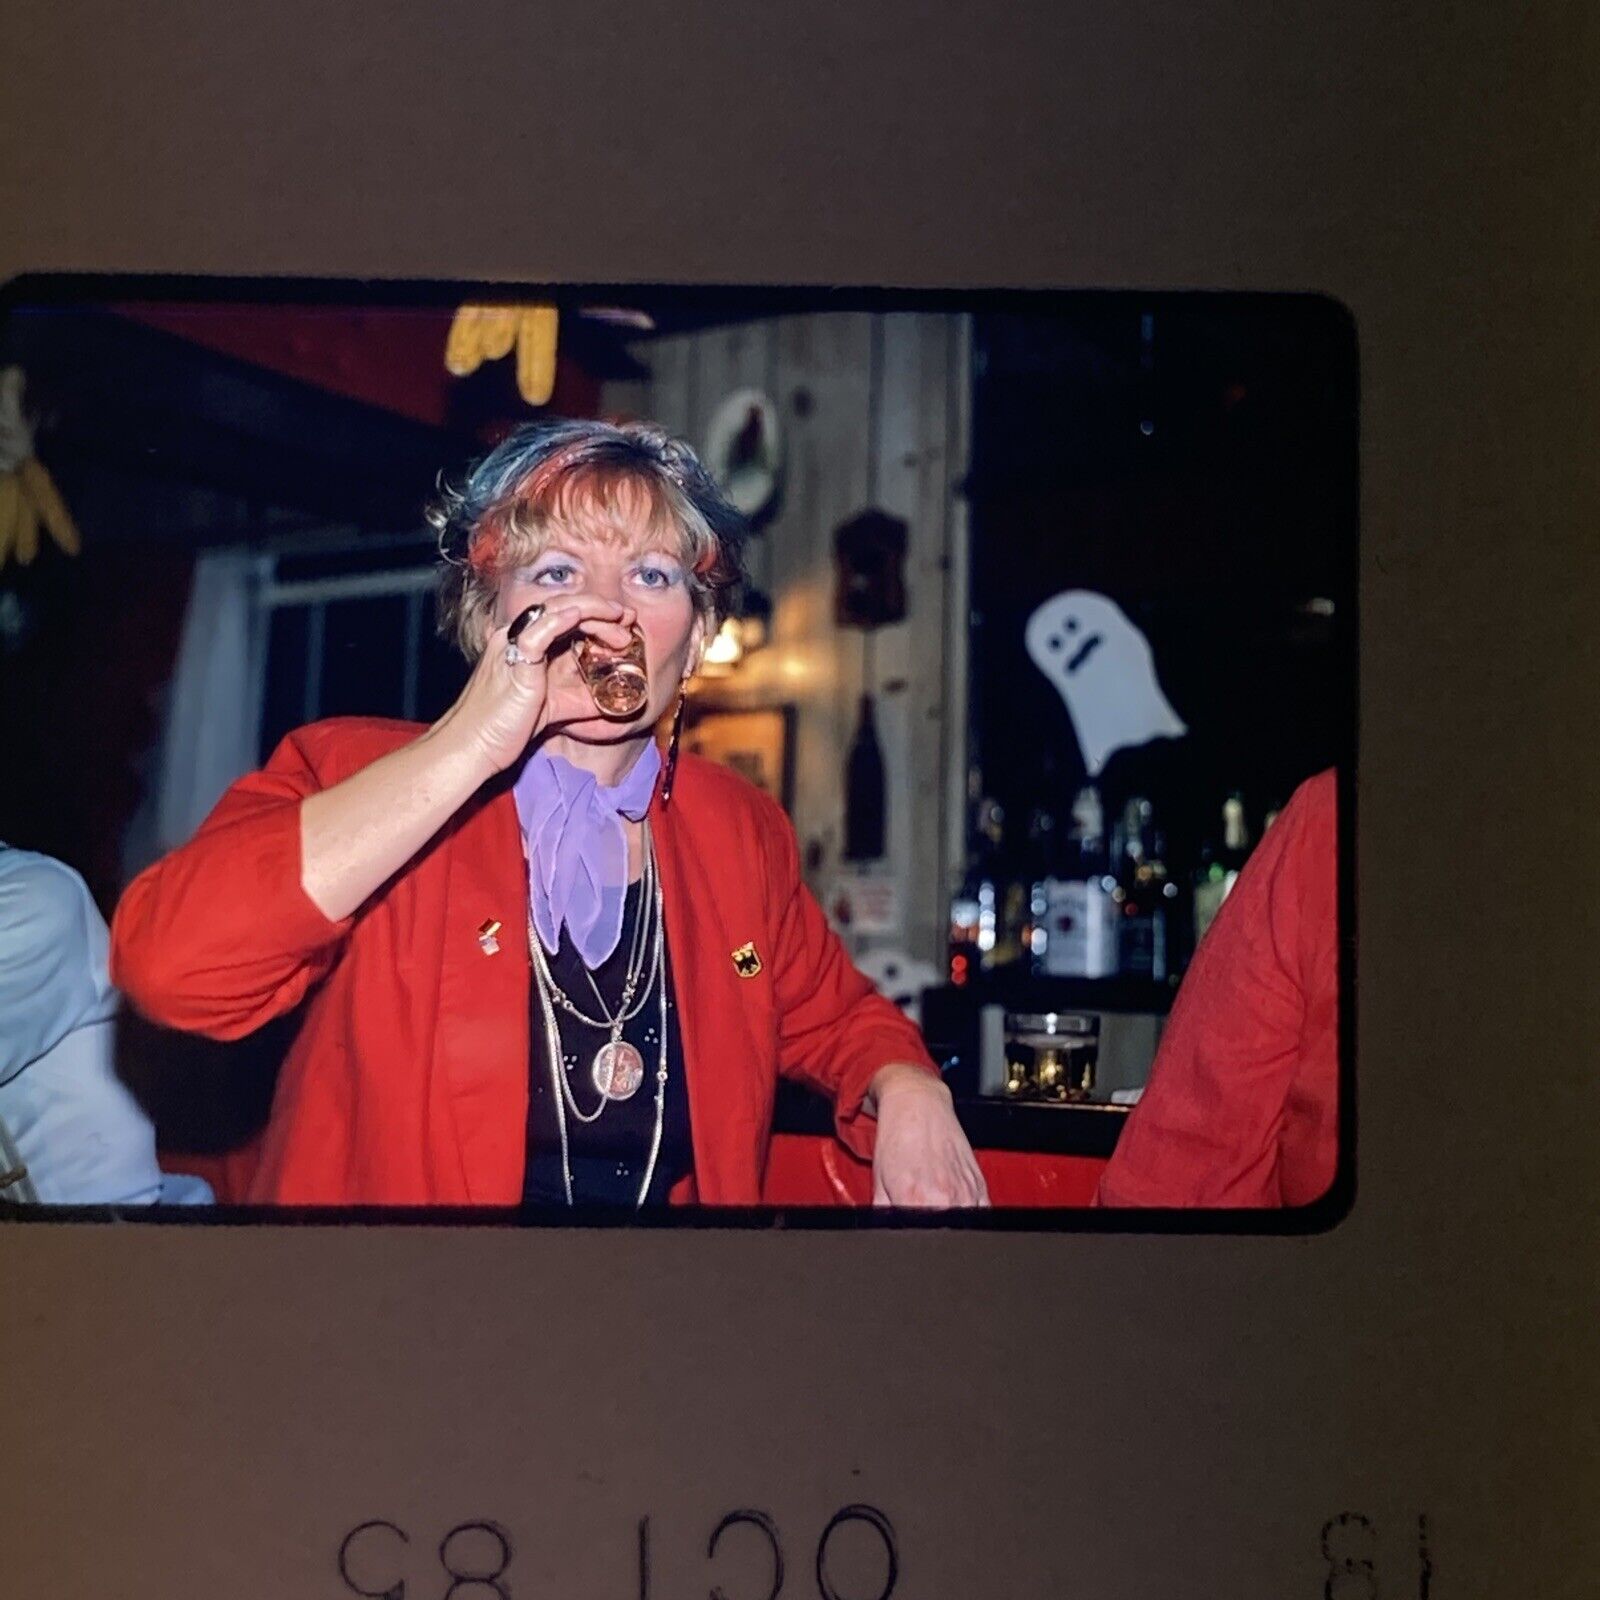 HALLOWEEN Woman Party Drinking Ghosts October 1985 35mm Original 2x2 Color Slide